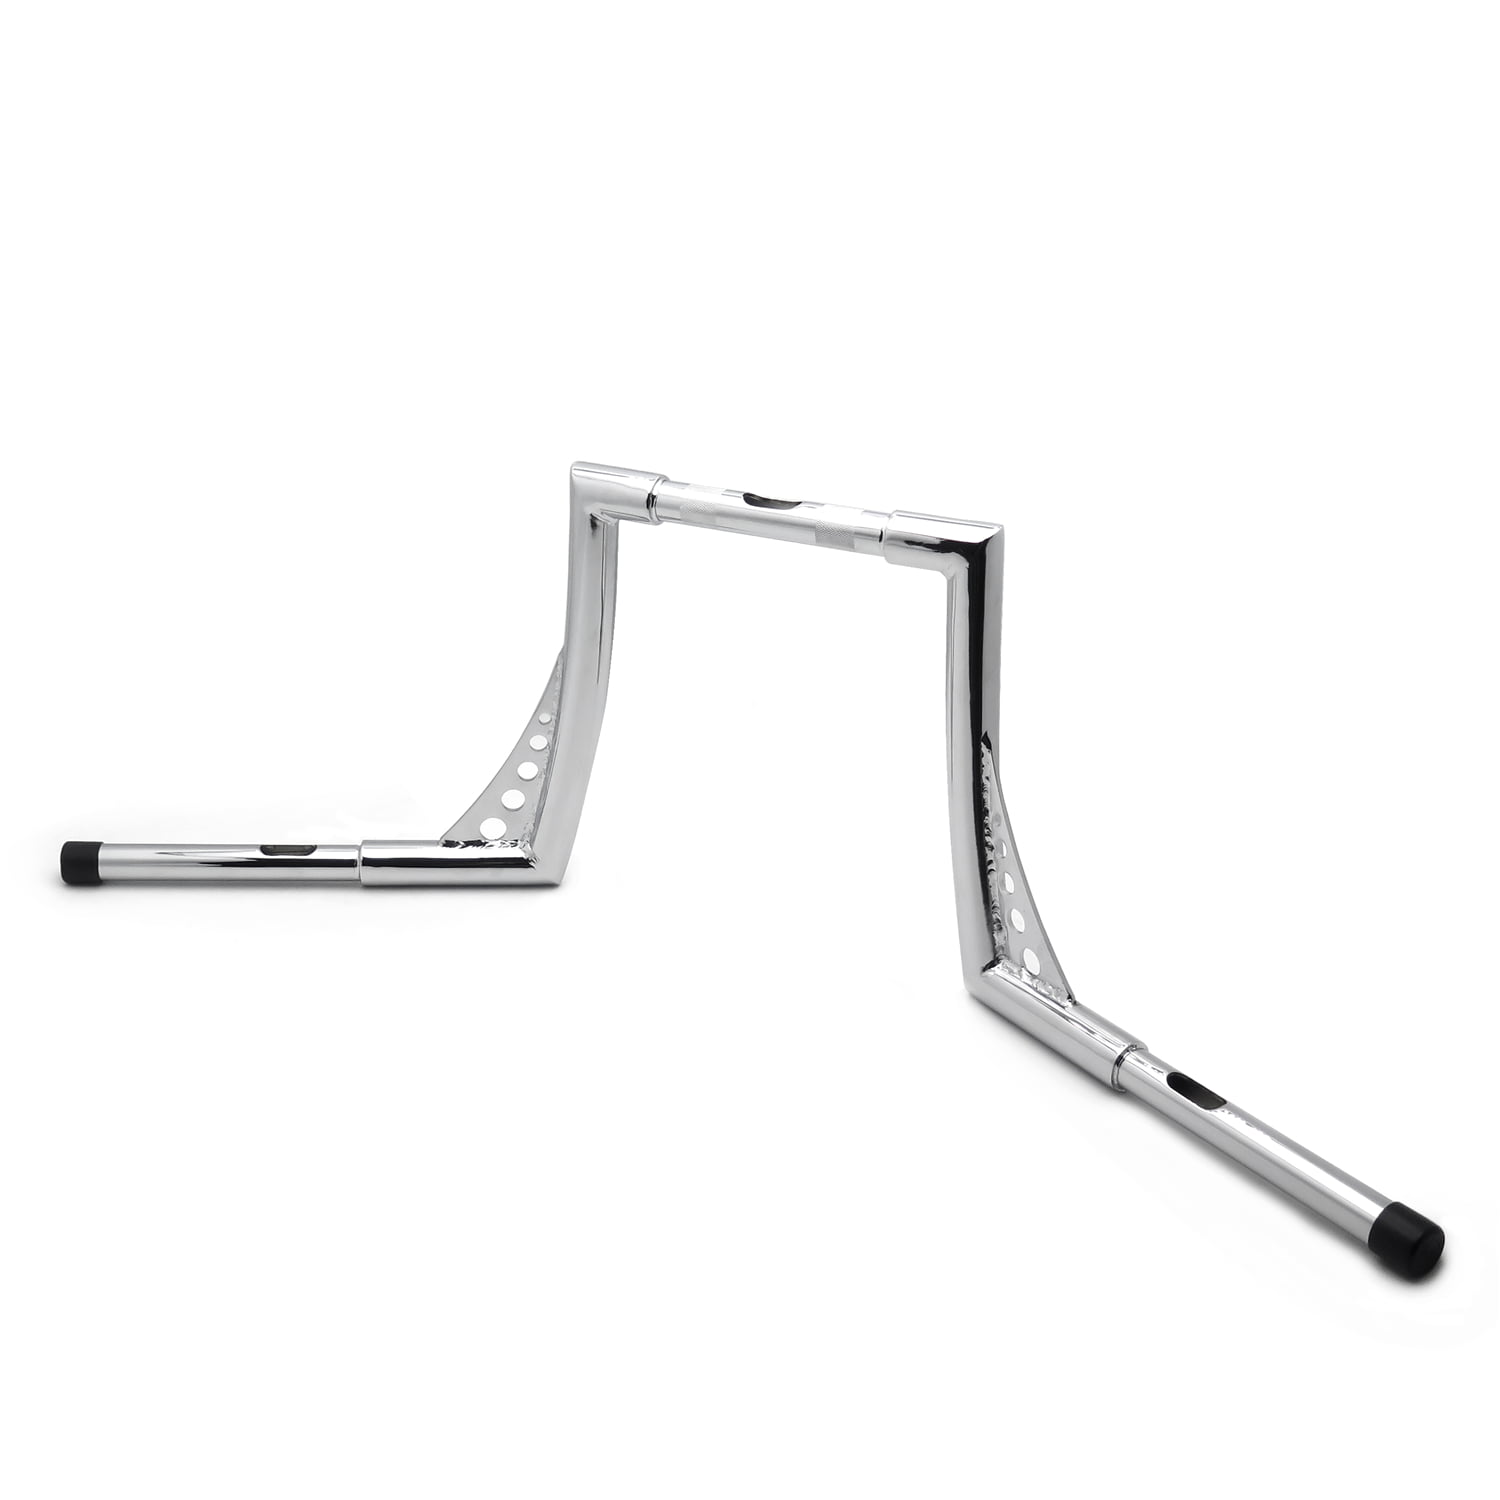 P/N: US-TGHD-HB002-I Ape Hangers Bars Fat 1-1/4 10 Rise Handlebars Compatible with Harley Softail Sportster XL HTTMT 